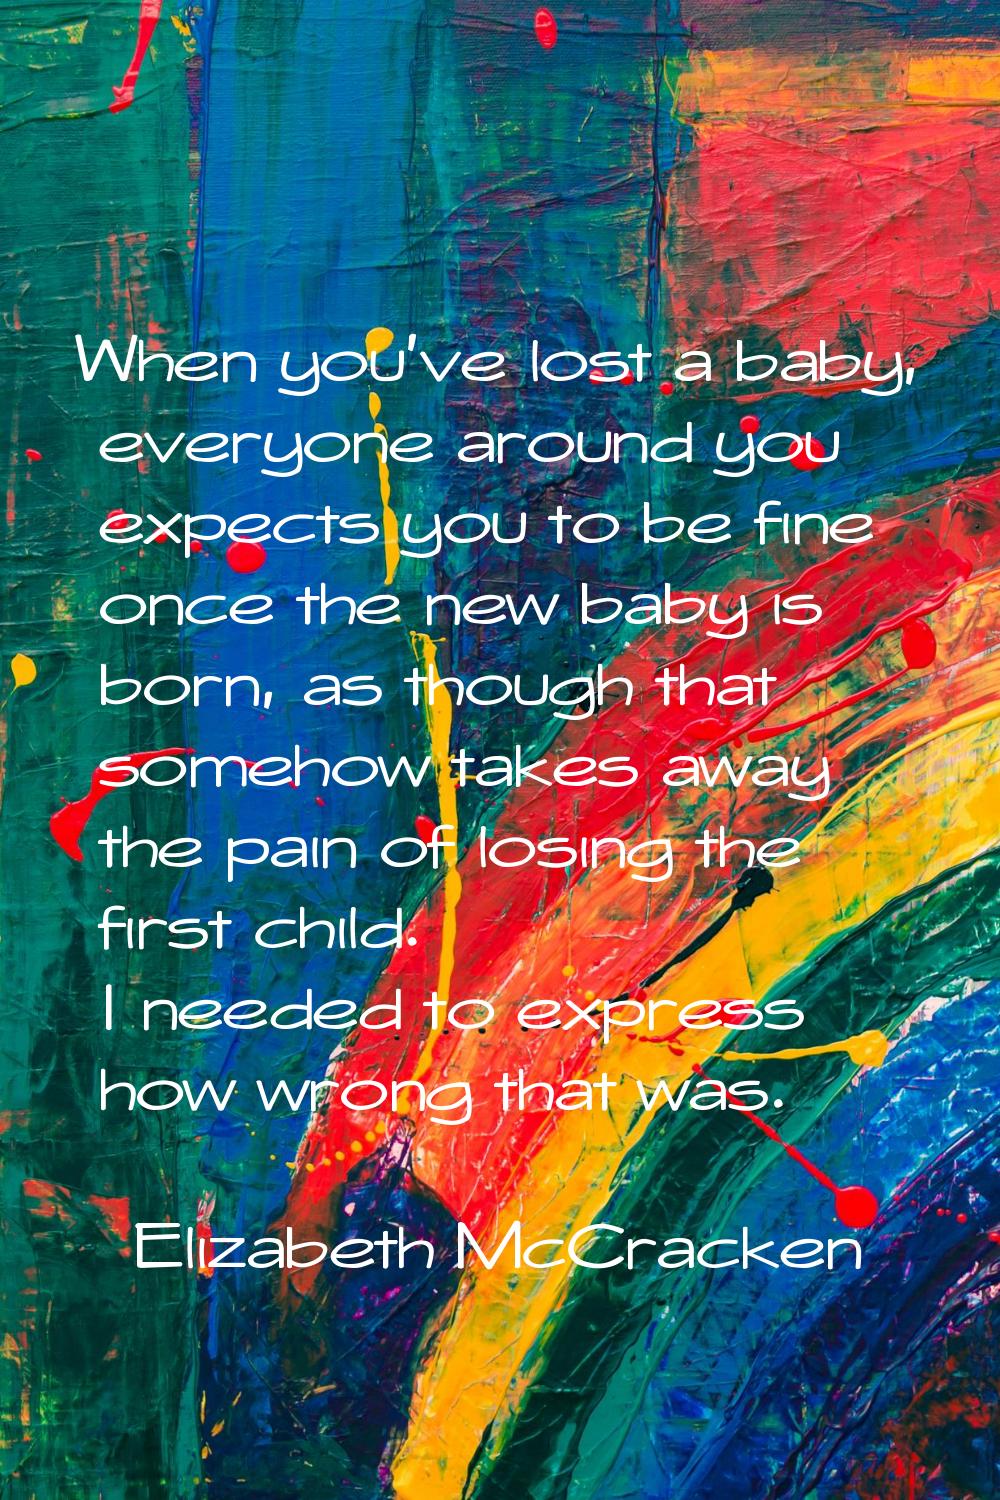 When you've lost a baby, everyone around you expects you to be fine once the new baby is born, as t